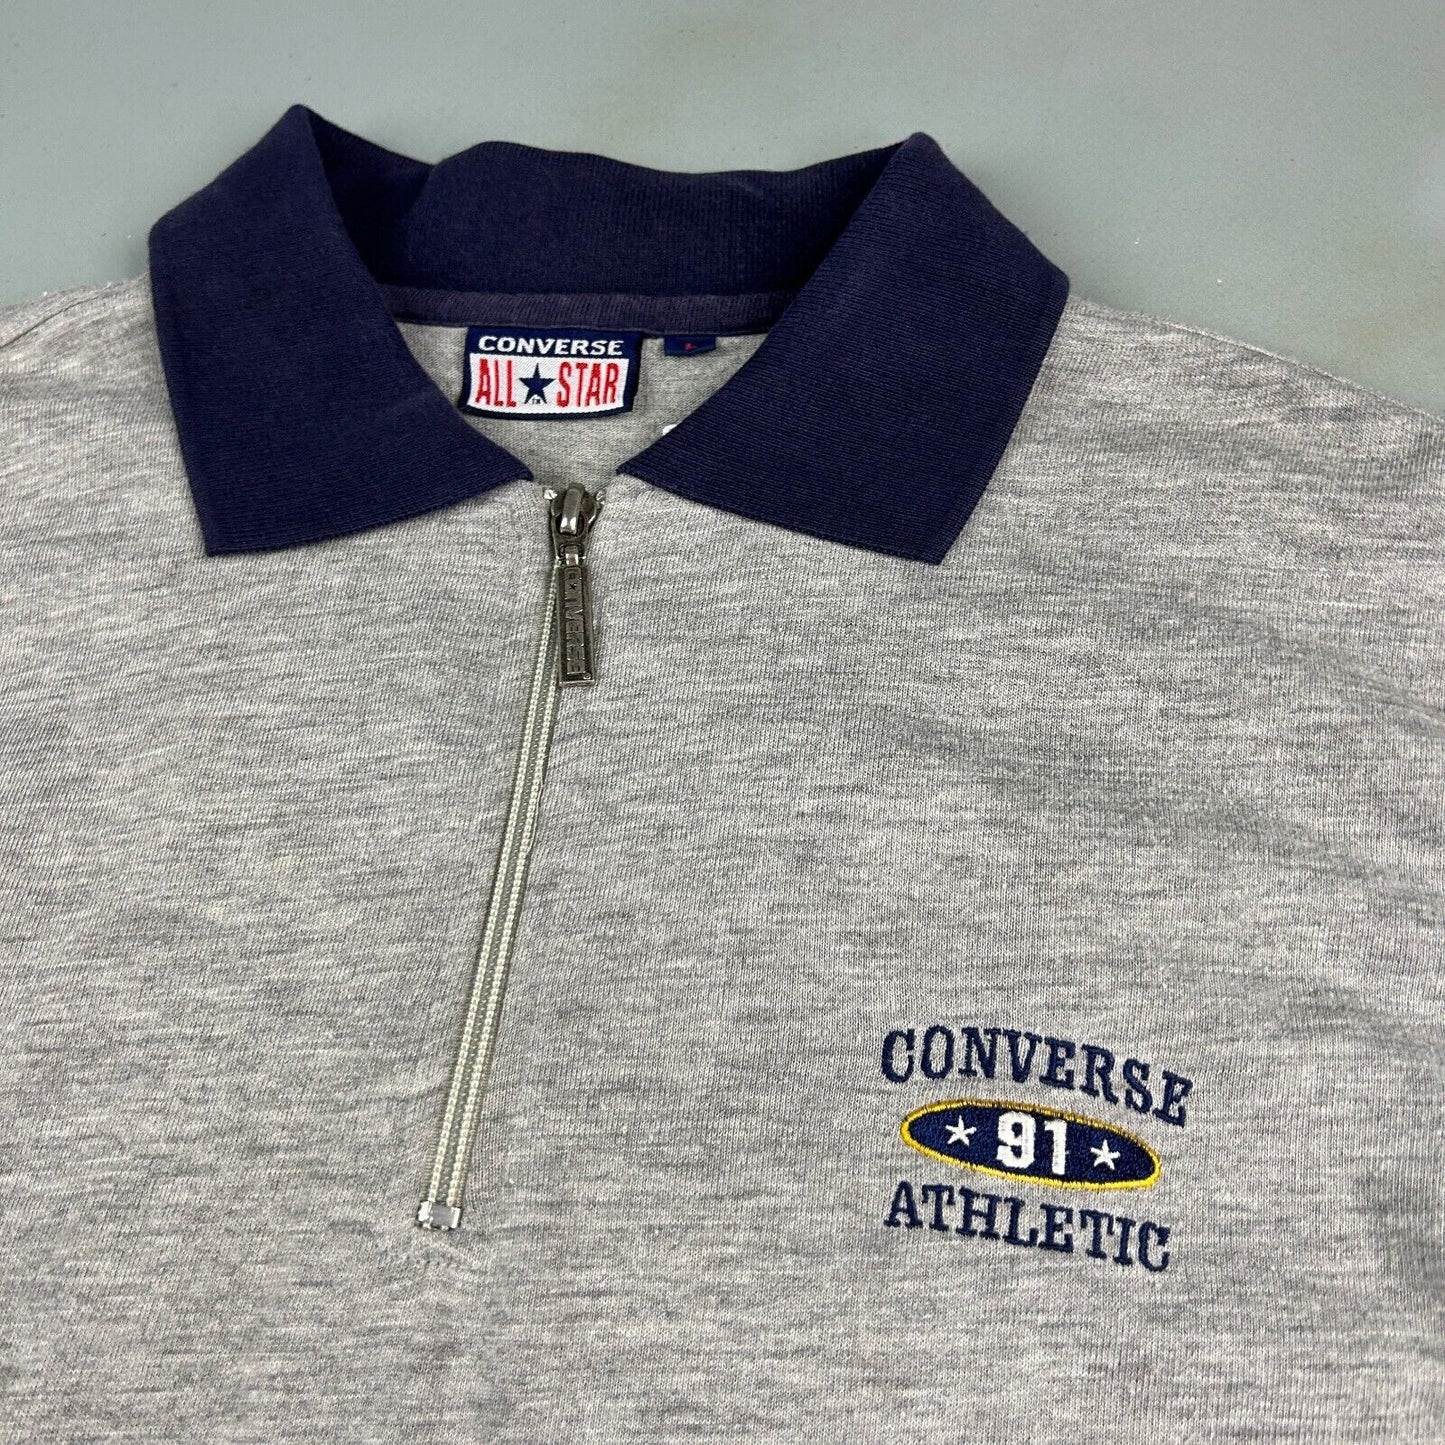 VINTAGE Converse All Star 1/4 Zip Polo Rugby Shirt sz Large Adult